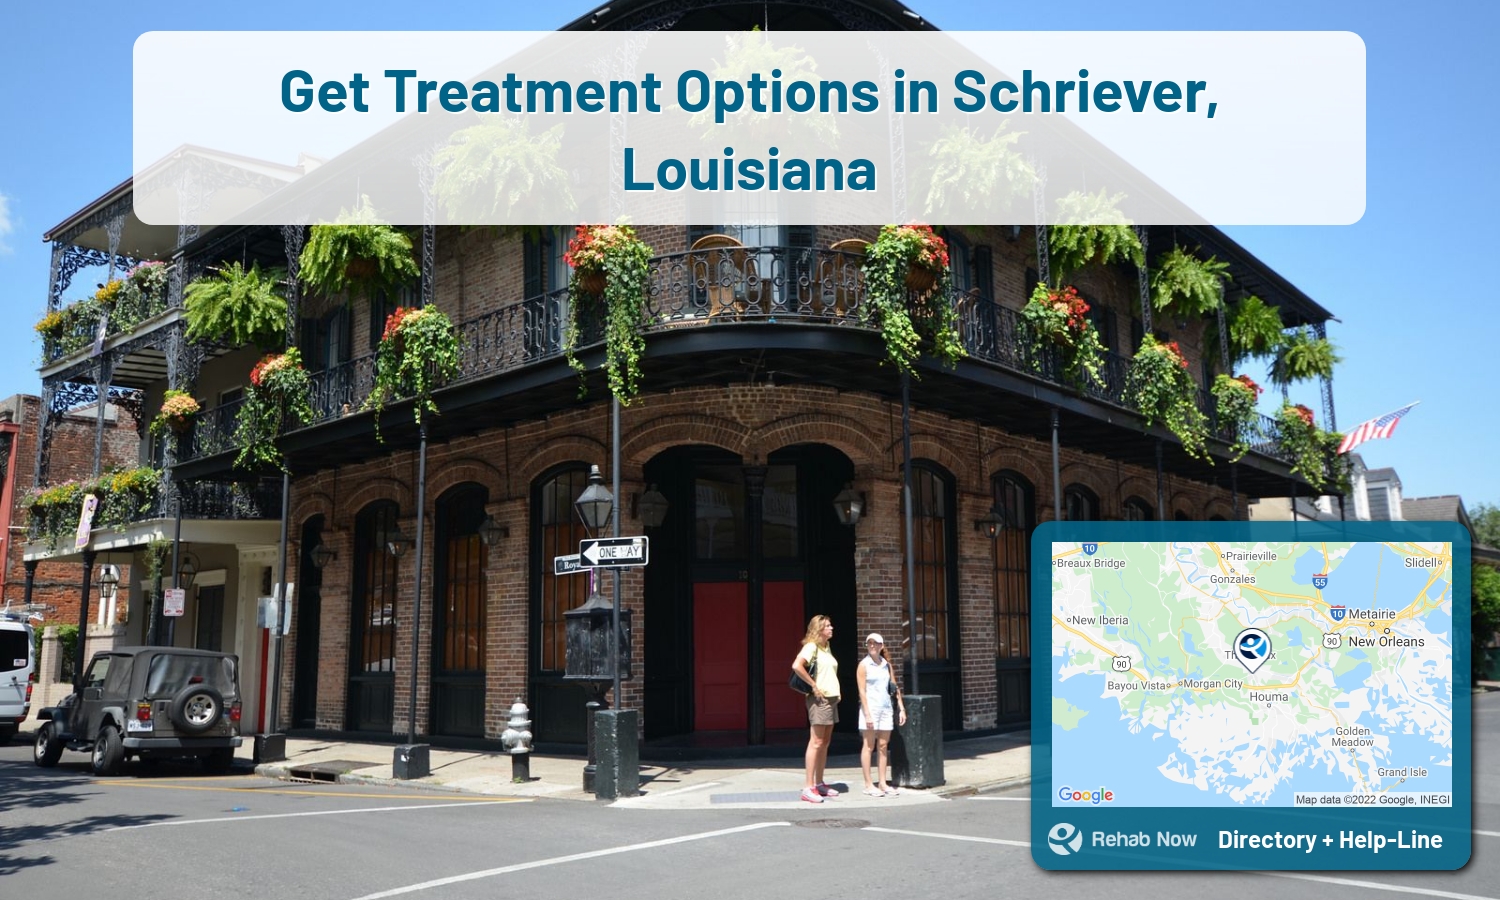 Our experts can help you find treatment now in Schriever, Louisiana. We list drug rehab and alcohol centers in Louisiana.